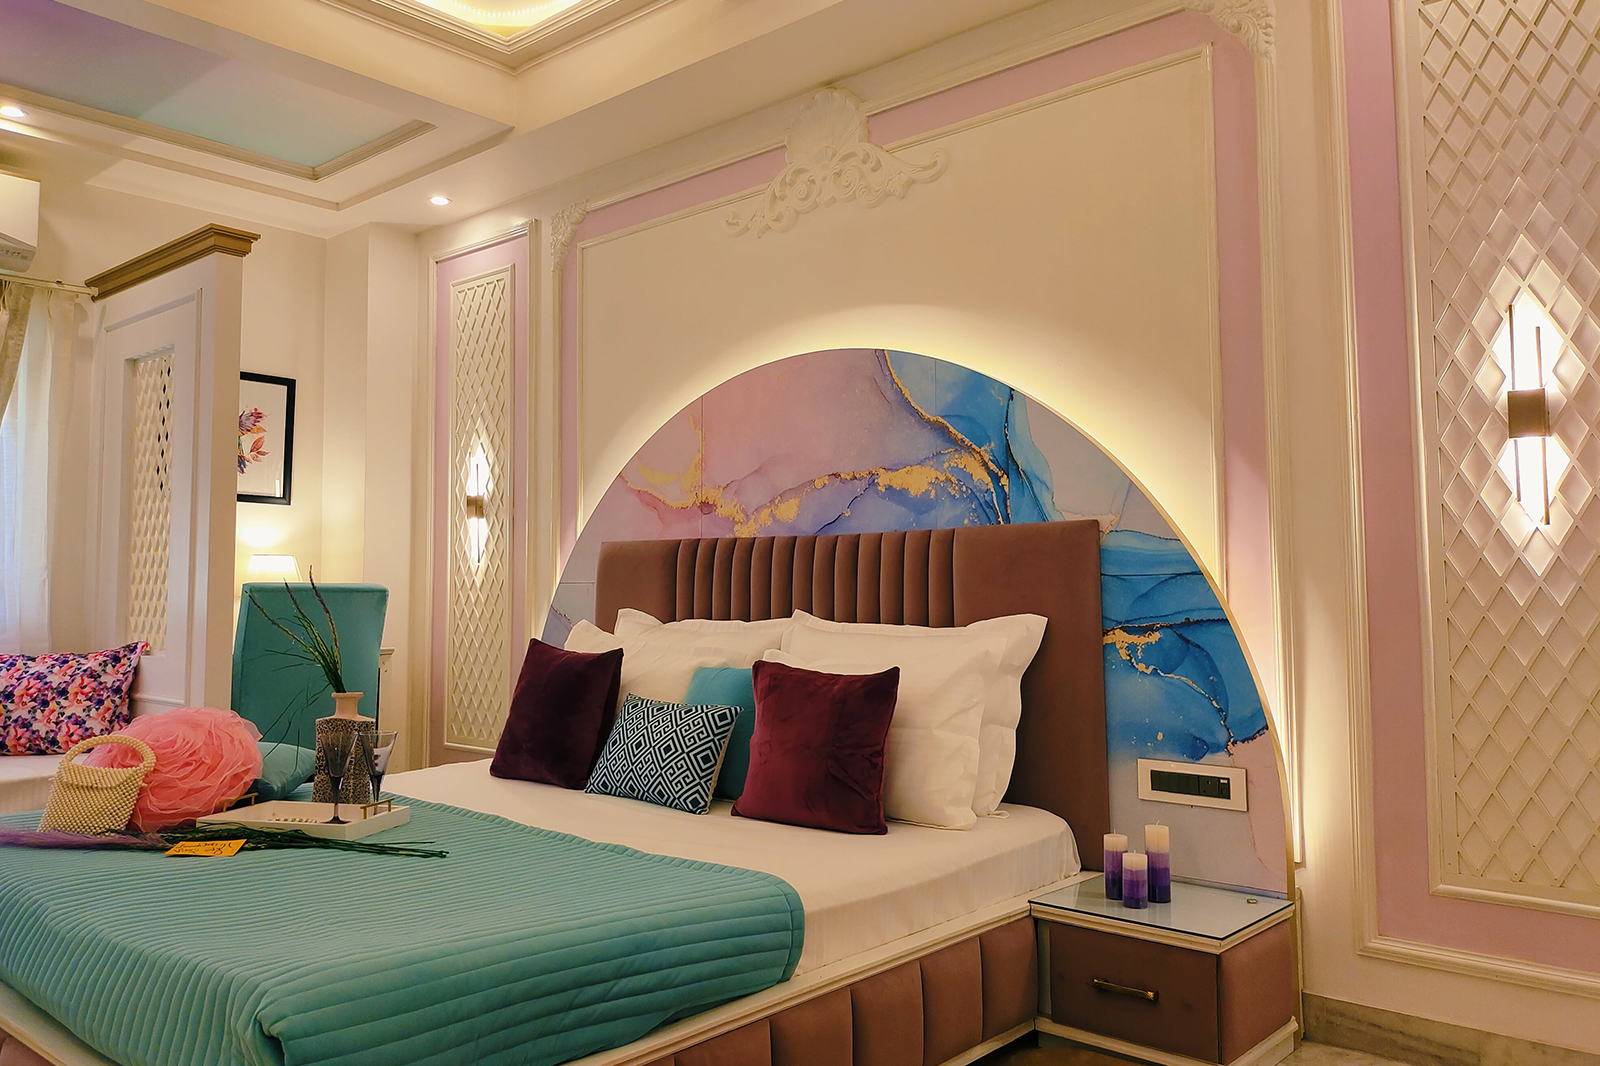 Lavender Theme Neo modern Room with Purple designer Bed & Extra Day bed